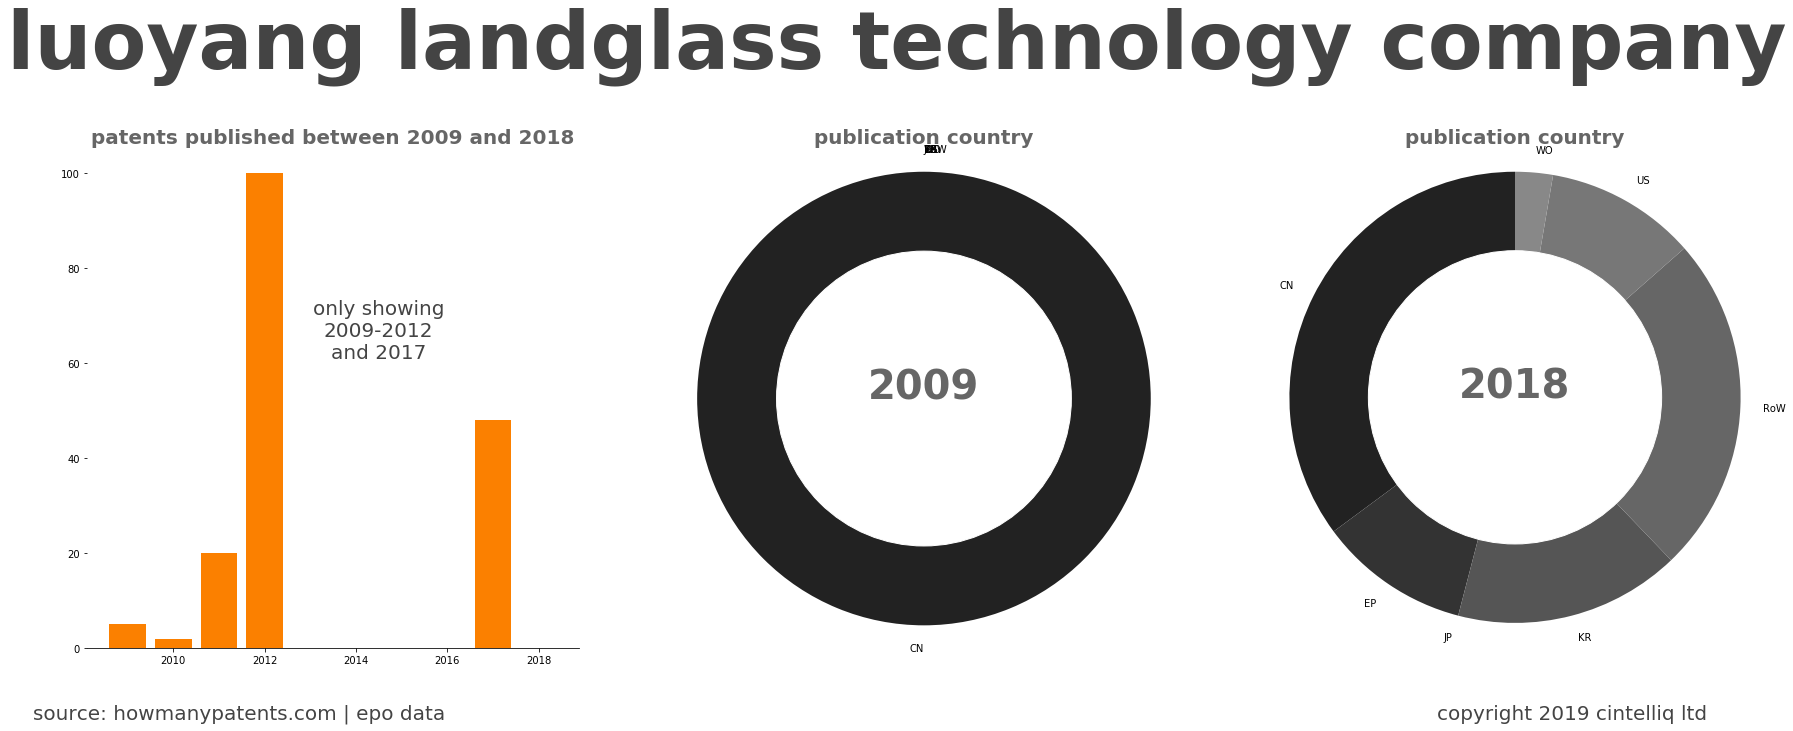 summary of patents for Luoyang Landglass Technology Company